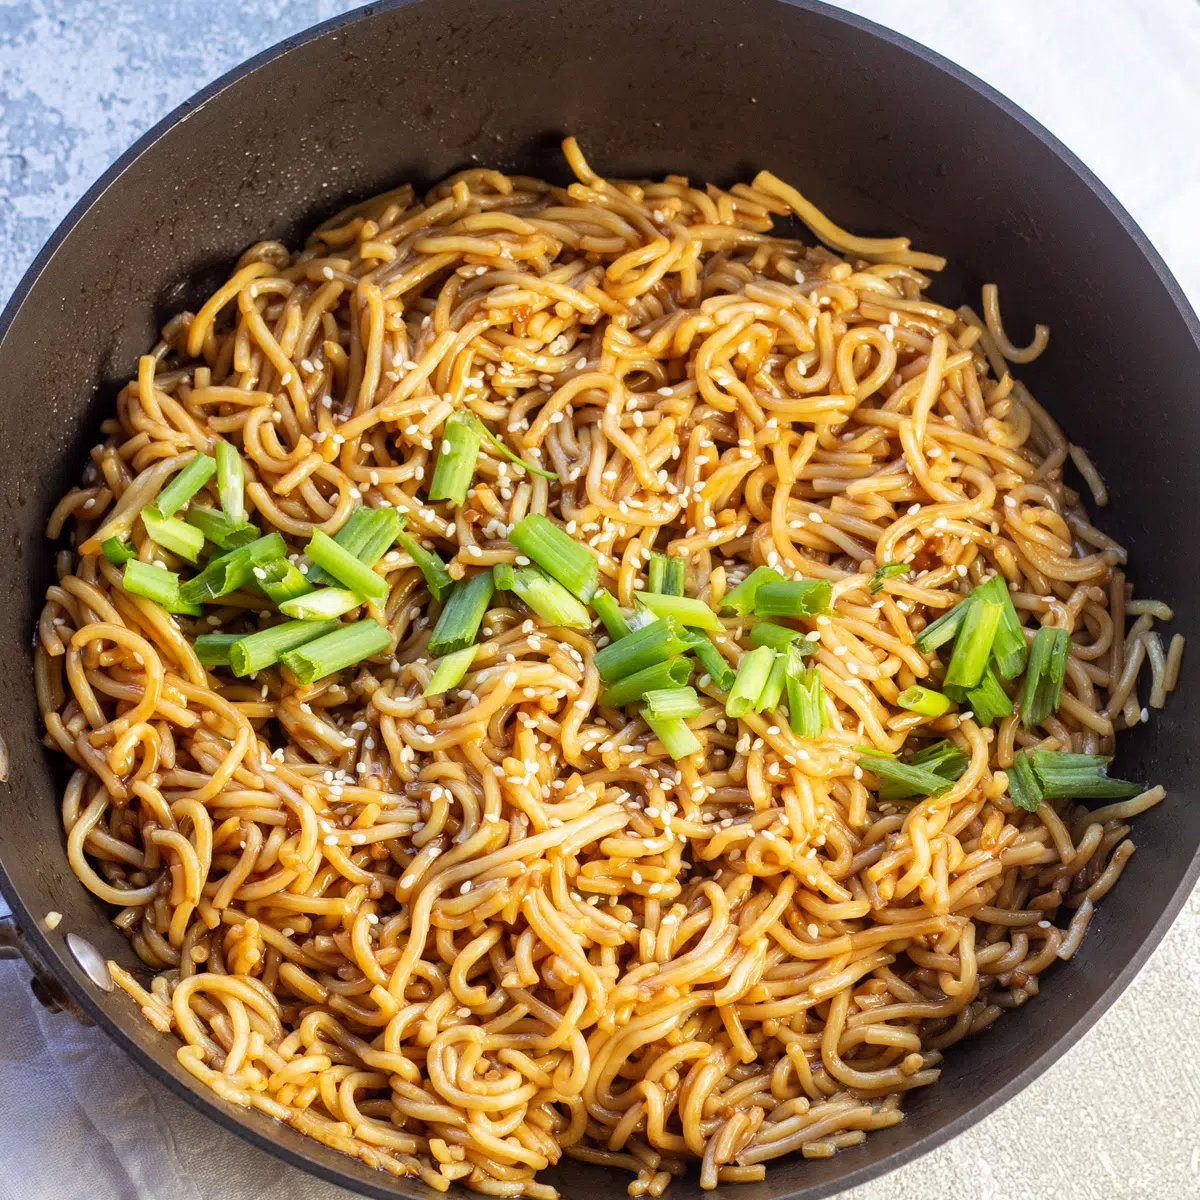 Teriyaki noodles served in skillet with sesame seed and green onion garnish.